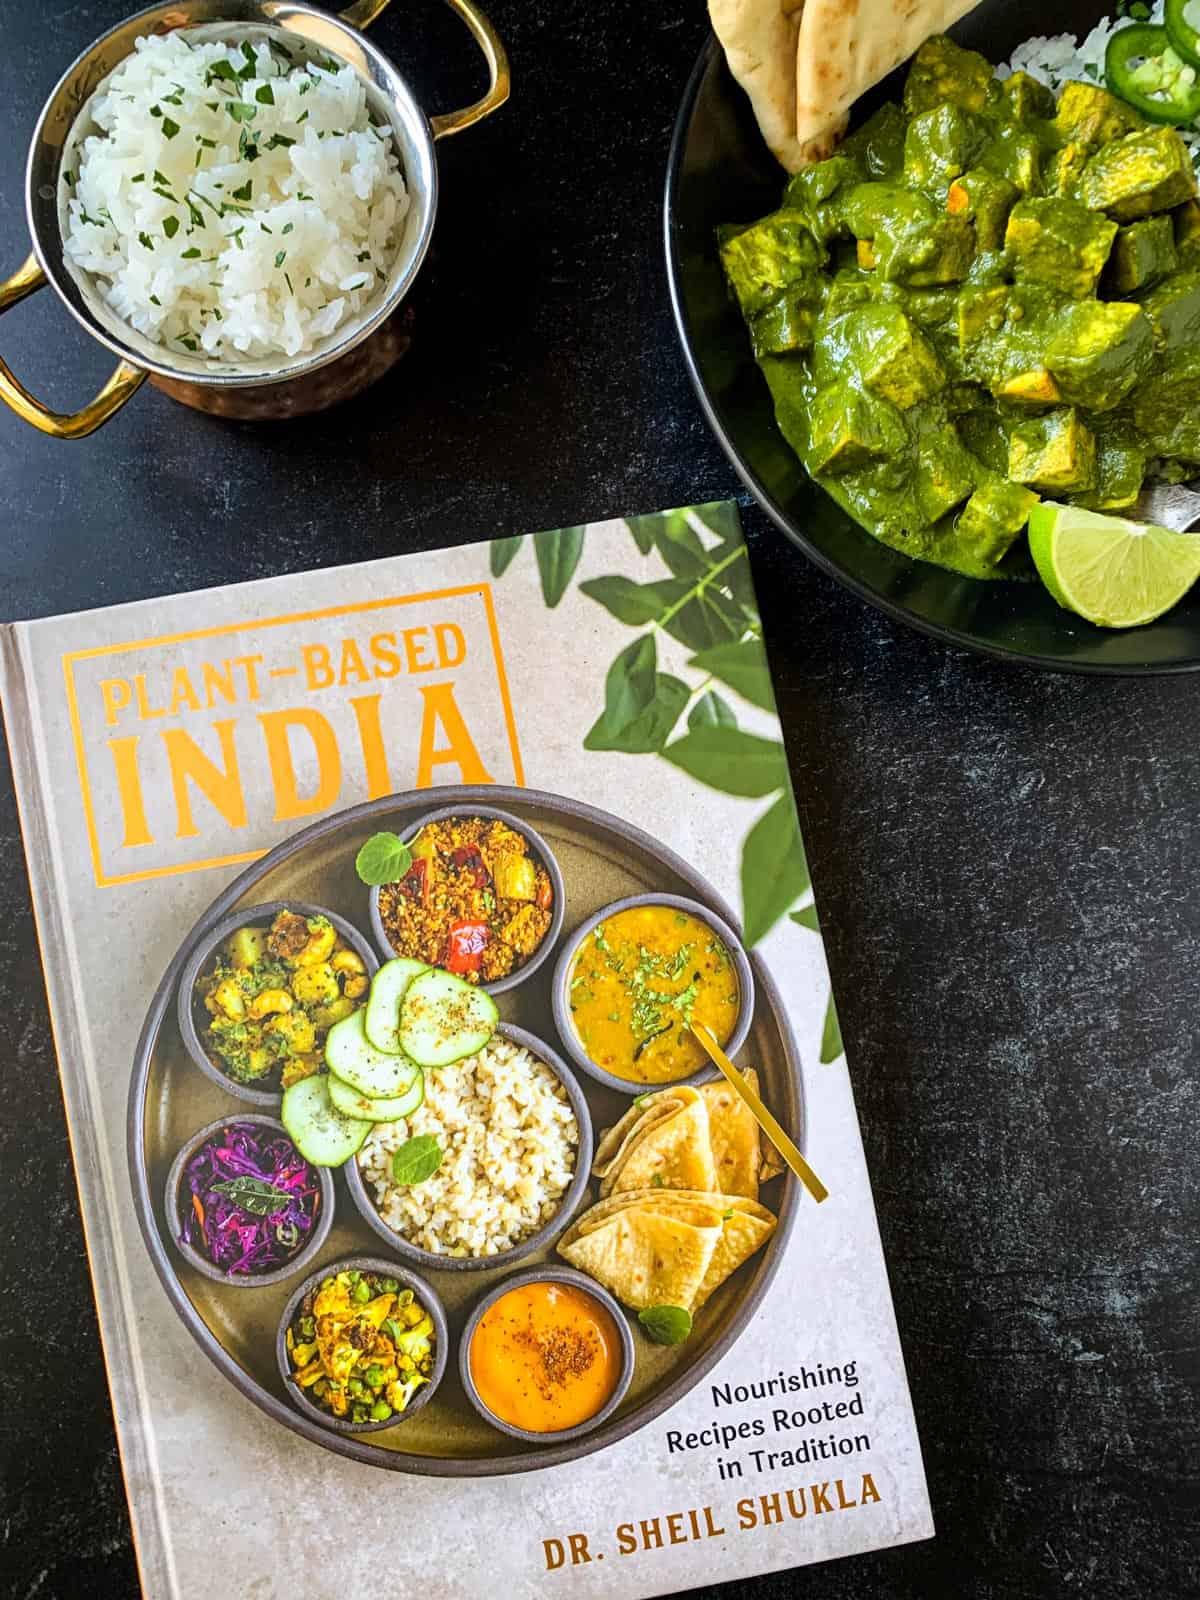 Plant-based India cookbook cover.